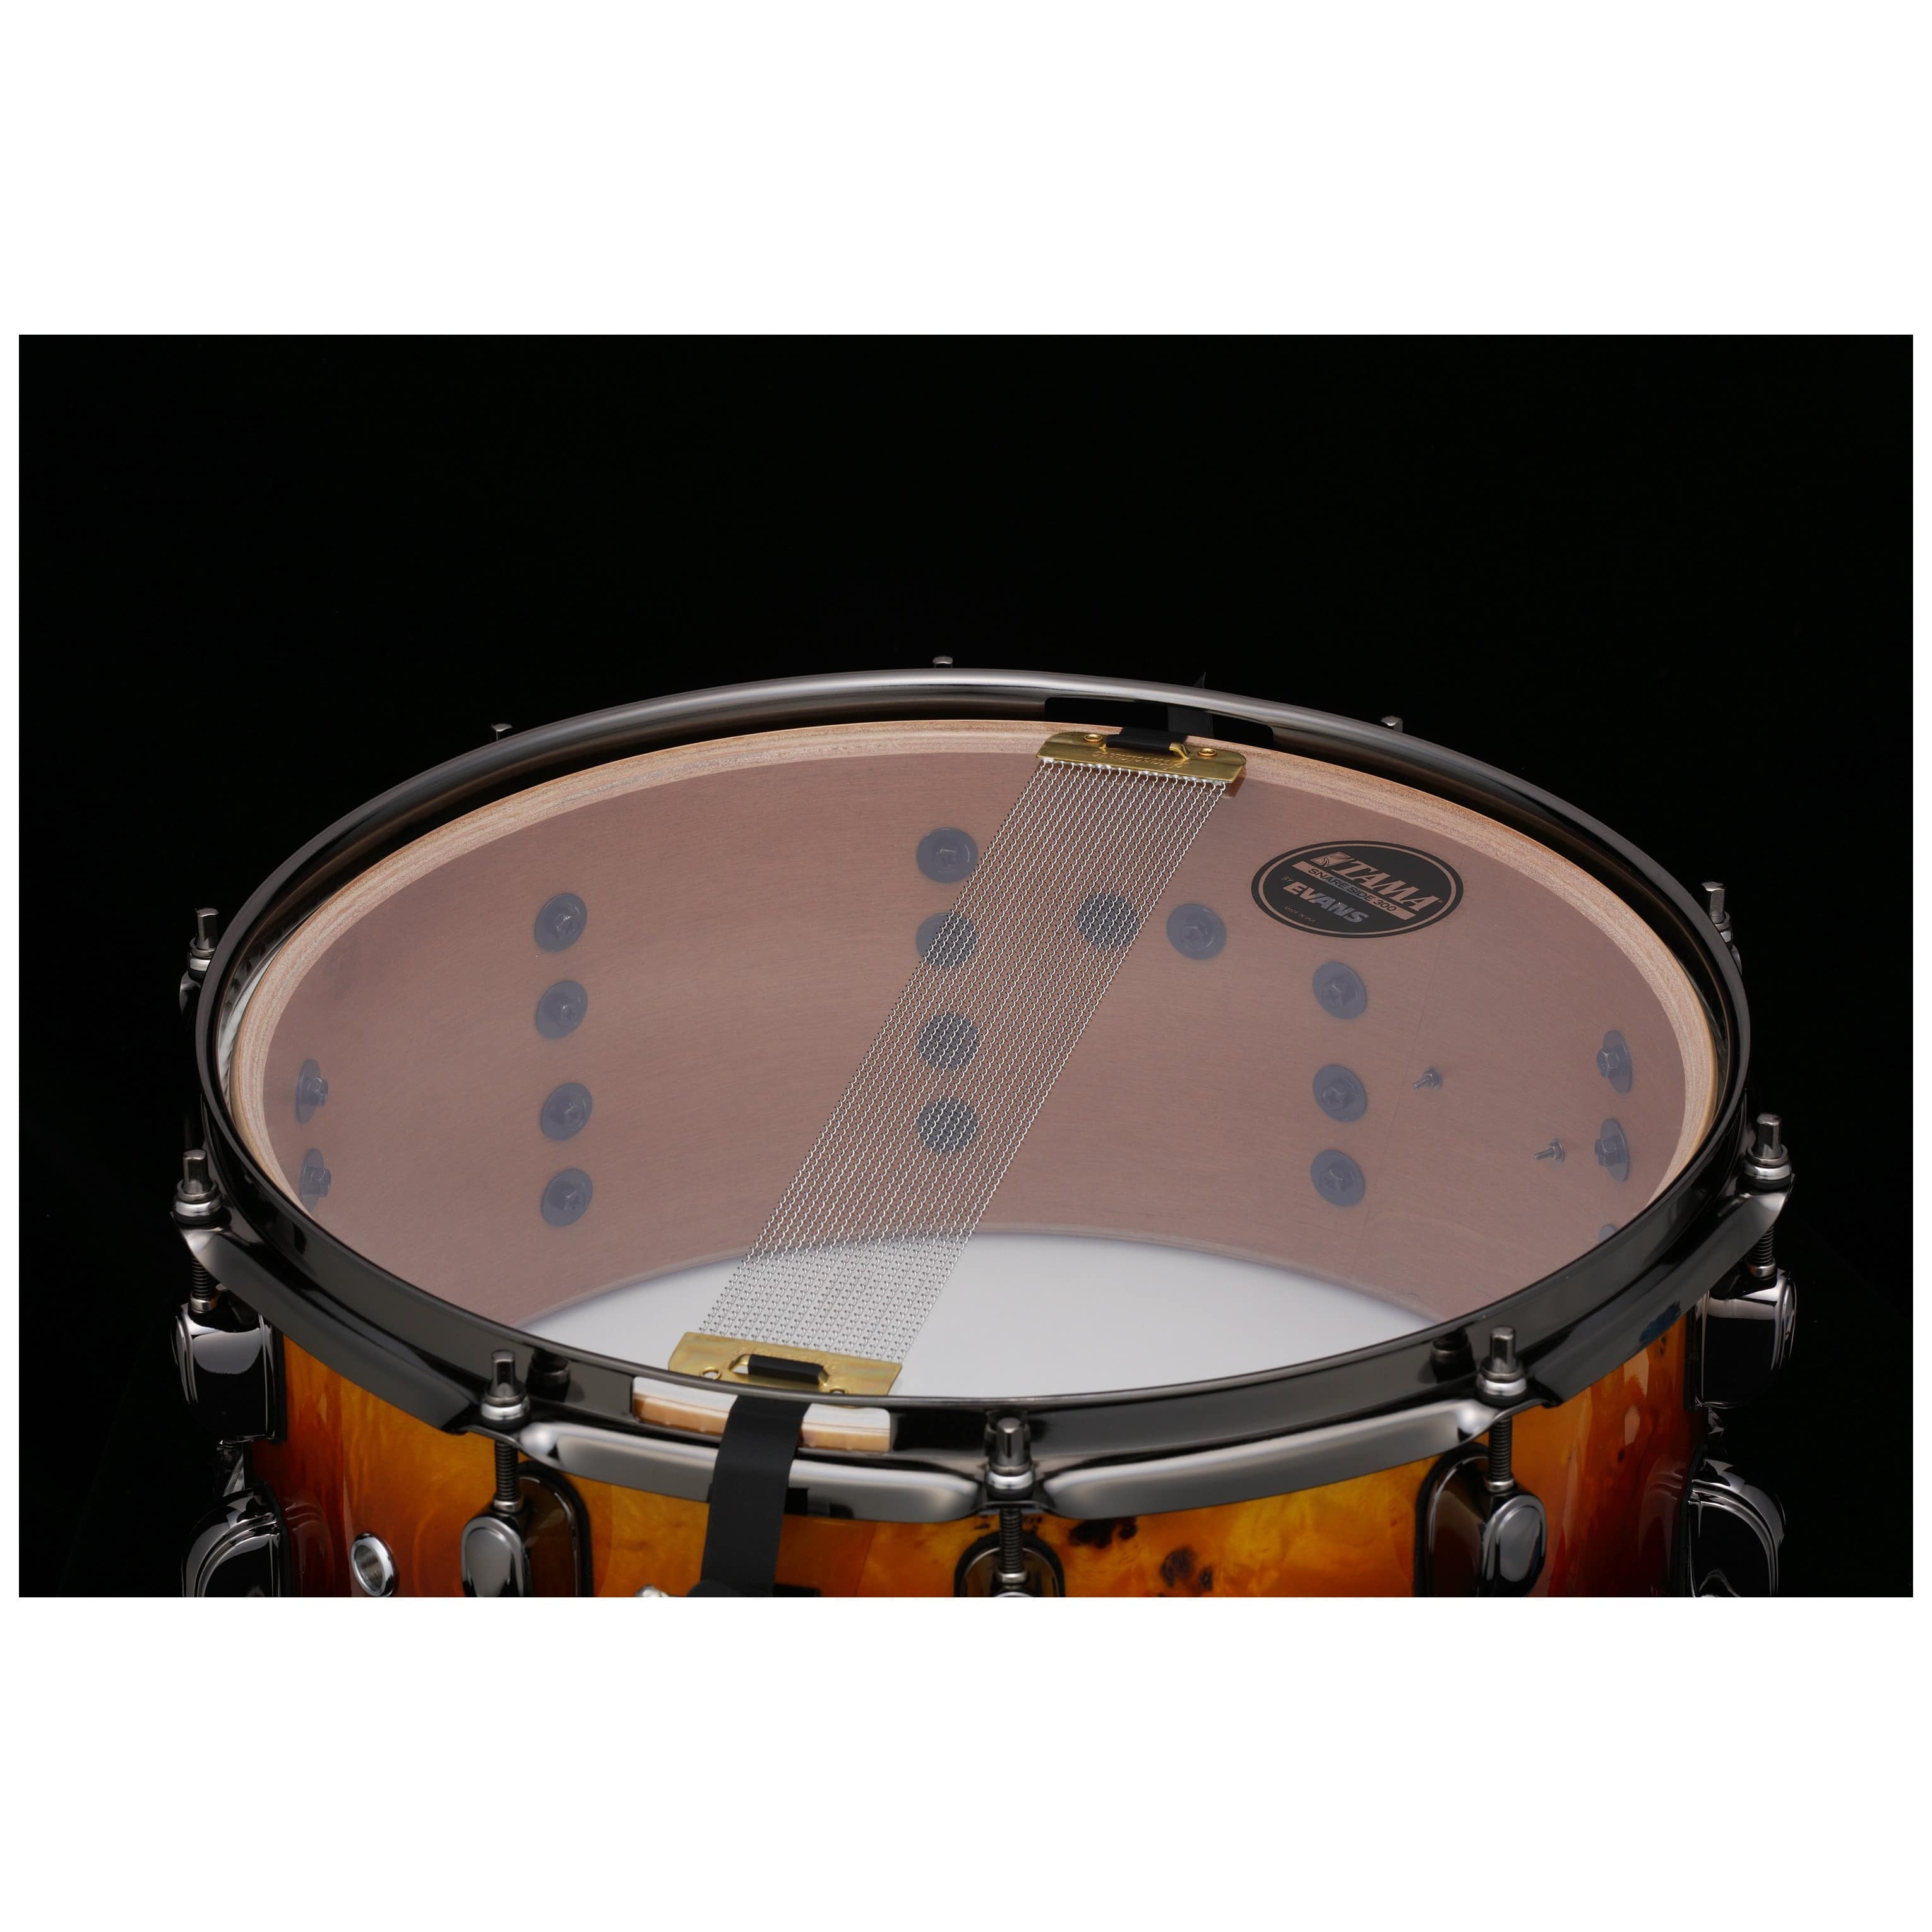 Tama LGK146-ASF Sound Lab Project Limited G-Kapur Snare Drum - 14" x 6" Amber Sunset Fade/Chrom HW 4